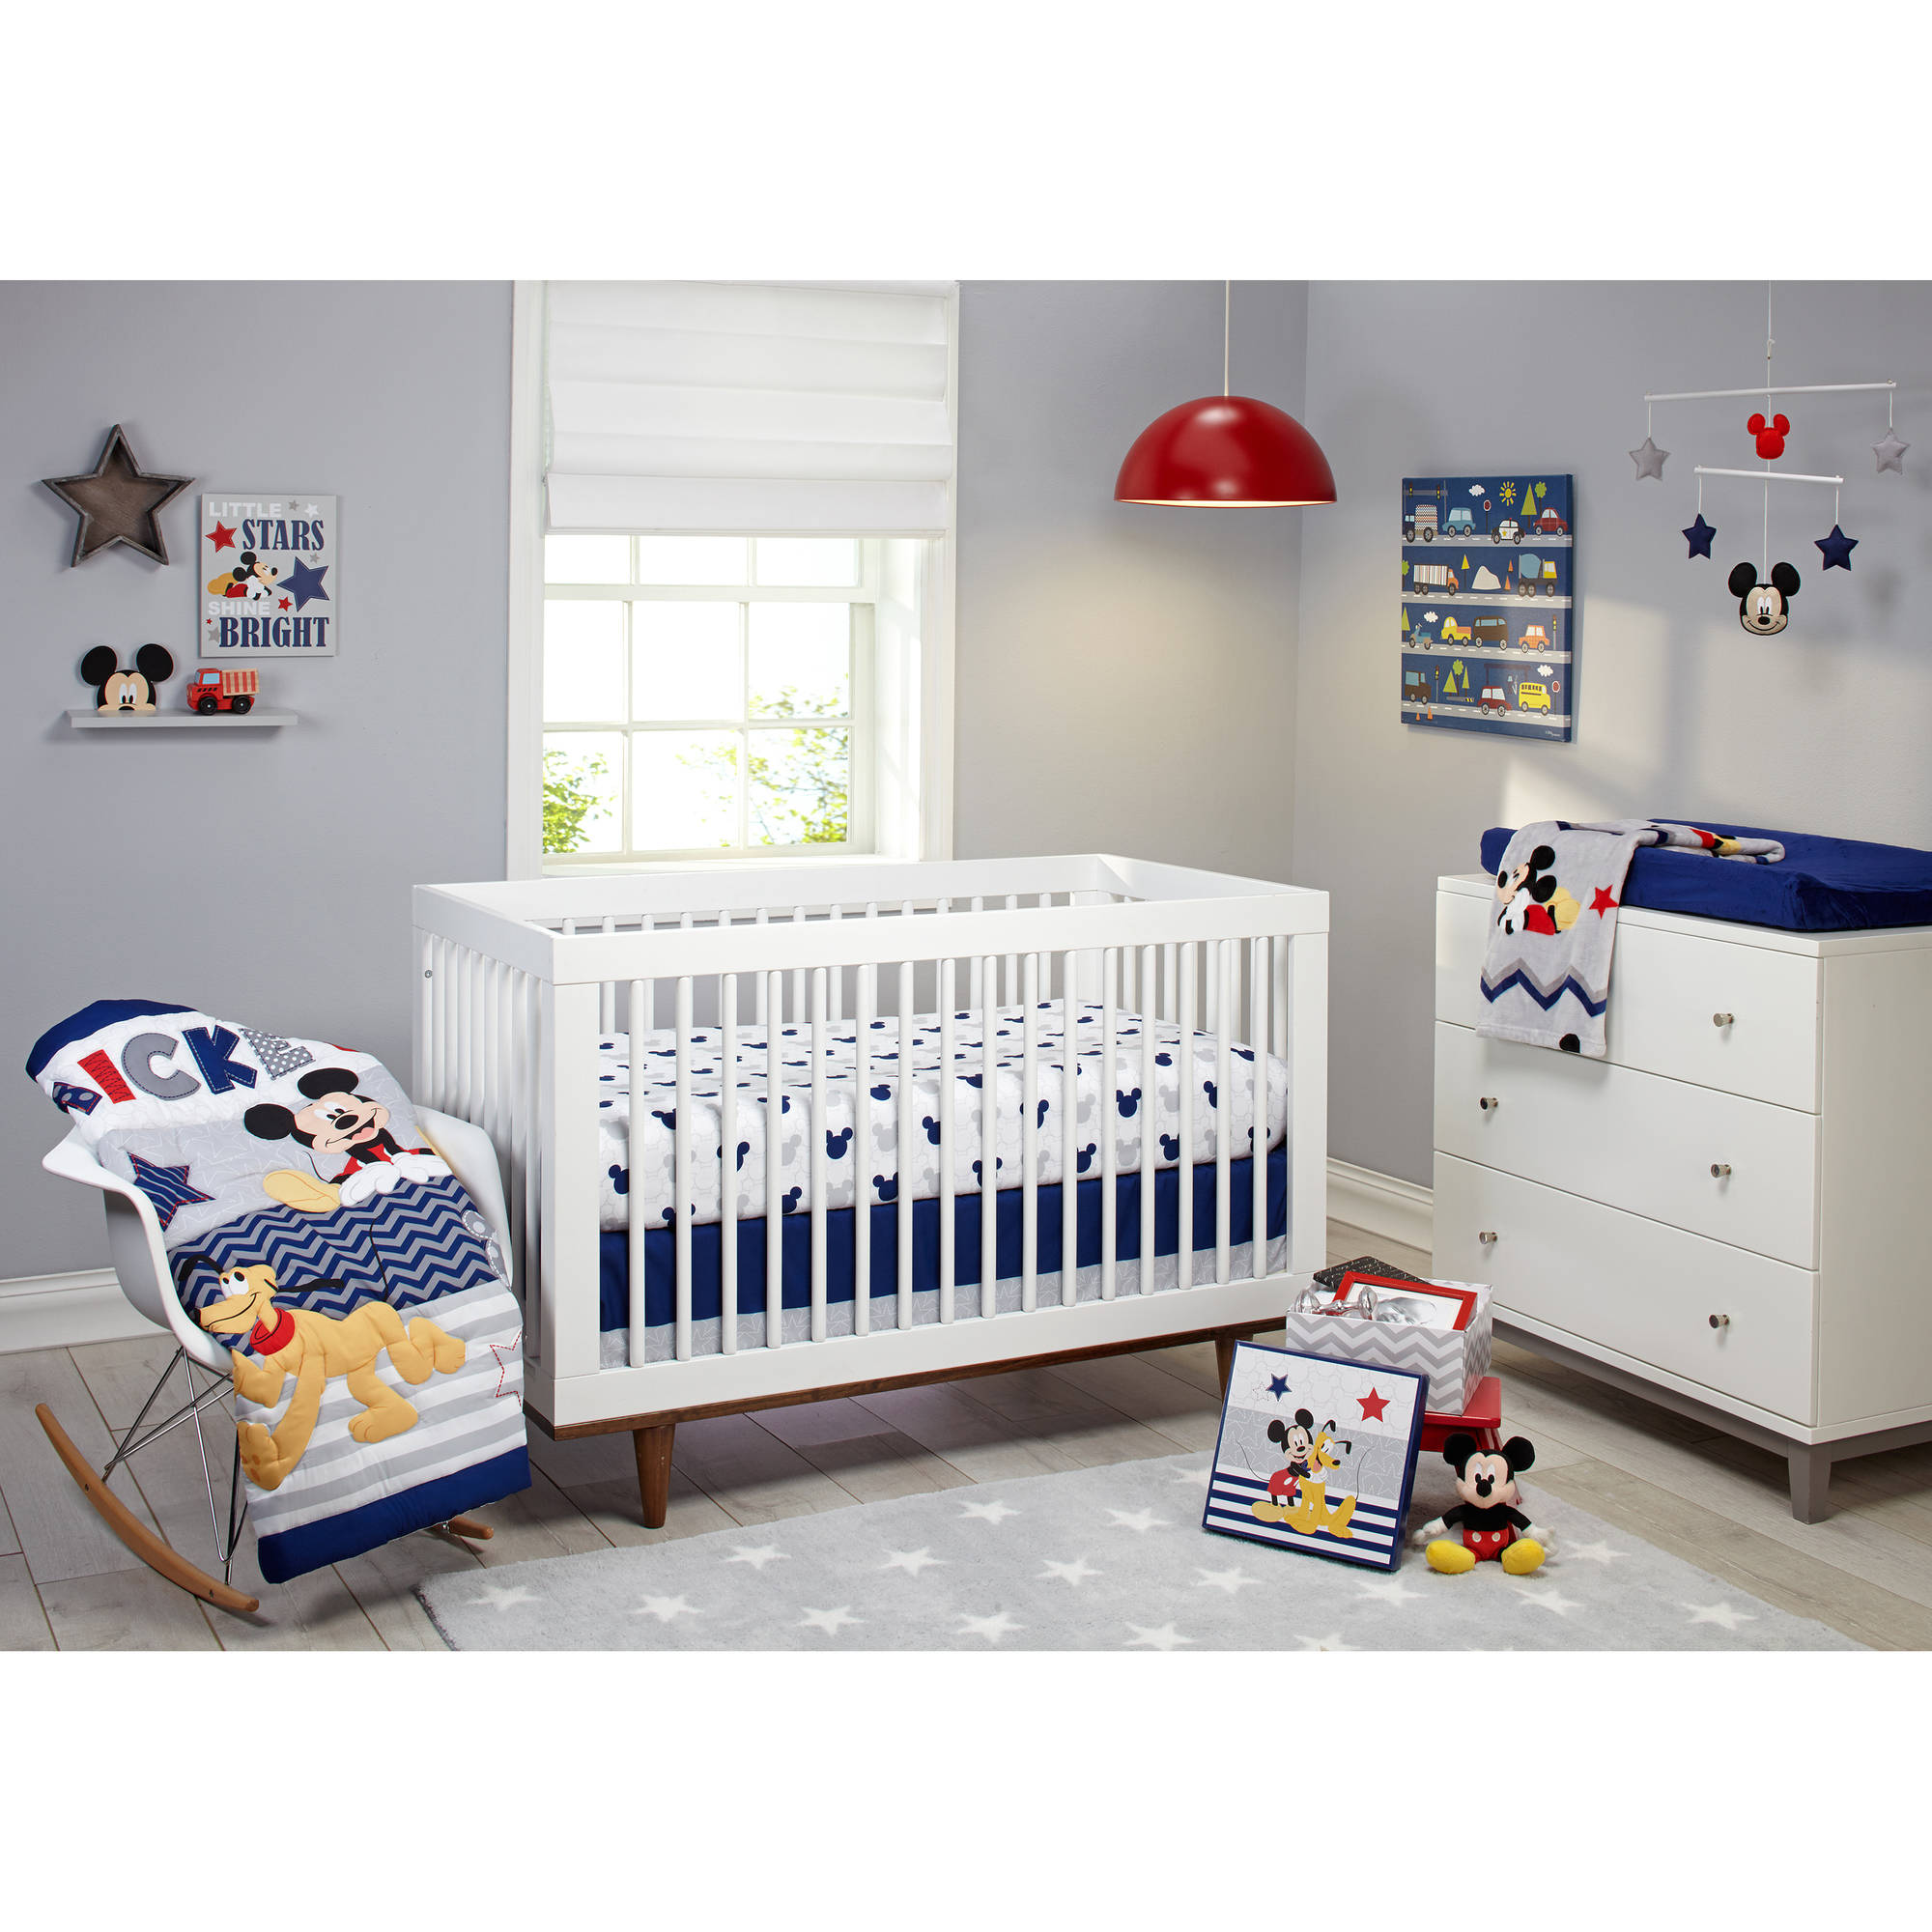 Disney Mickey Mouse 4-Piece Crib Bedding Set, Blue, Let's Go Mickey II - image 1 of 7